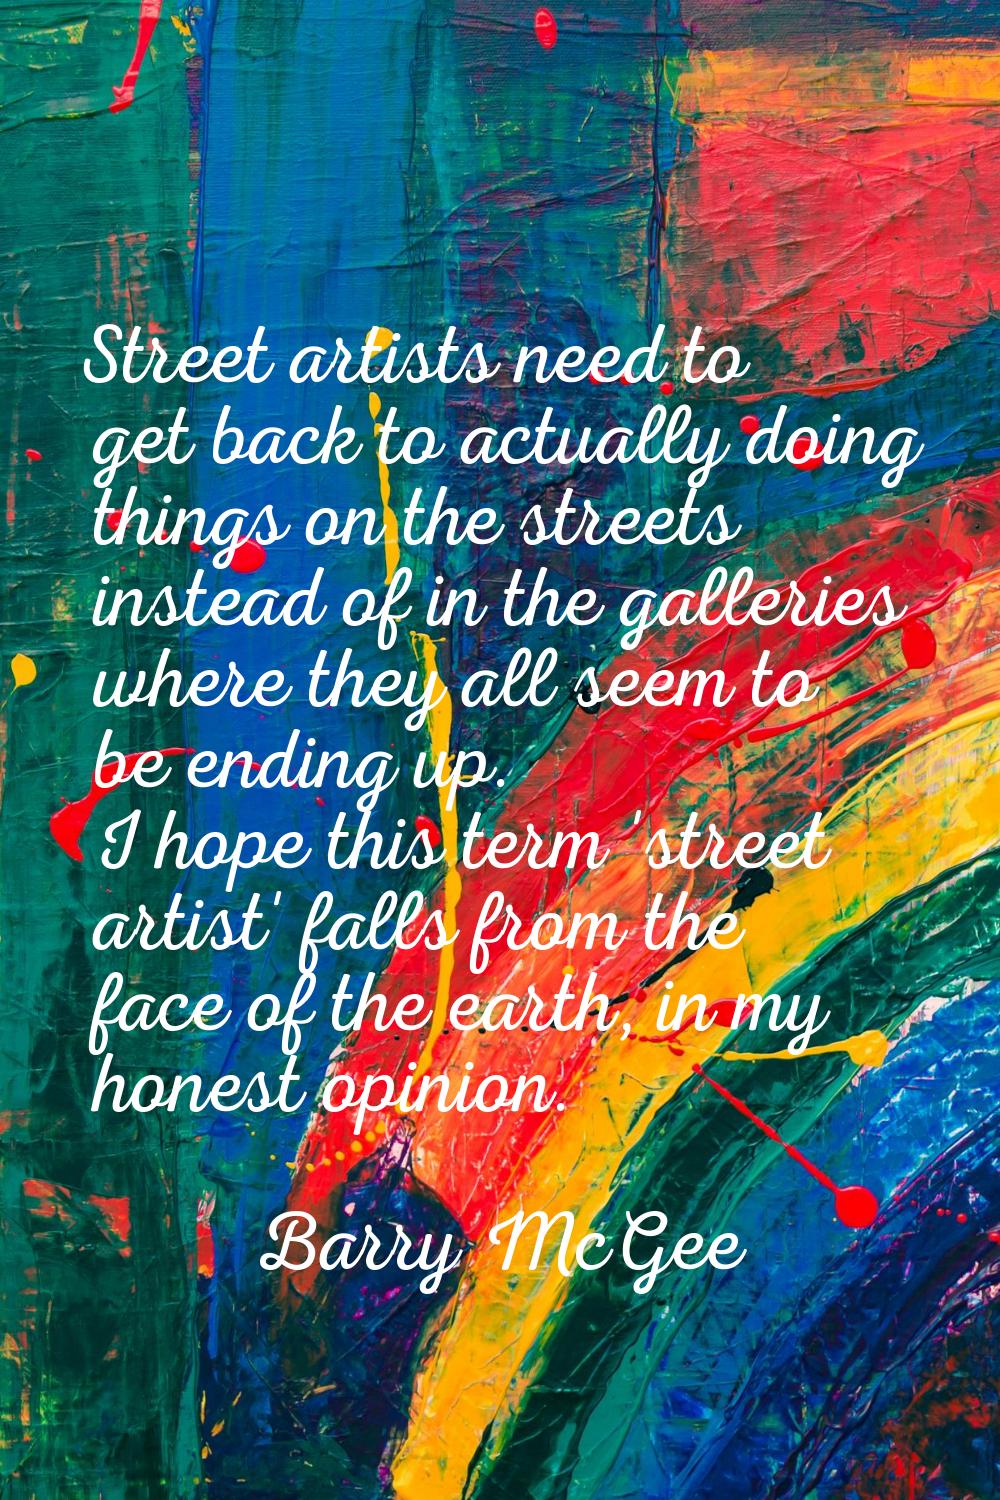 Street artists need to get back to actually doing things on the streets instead of in the galleries